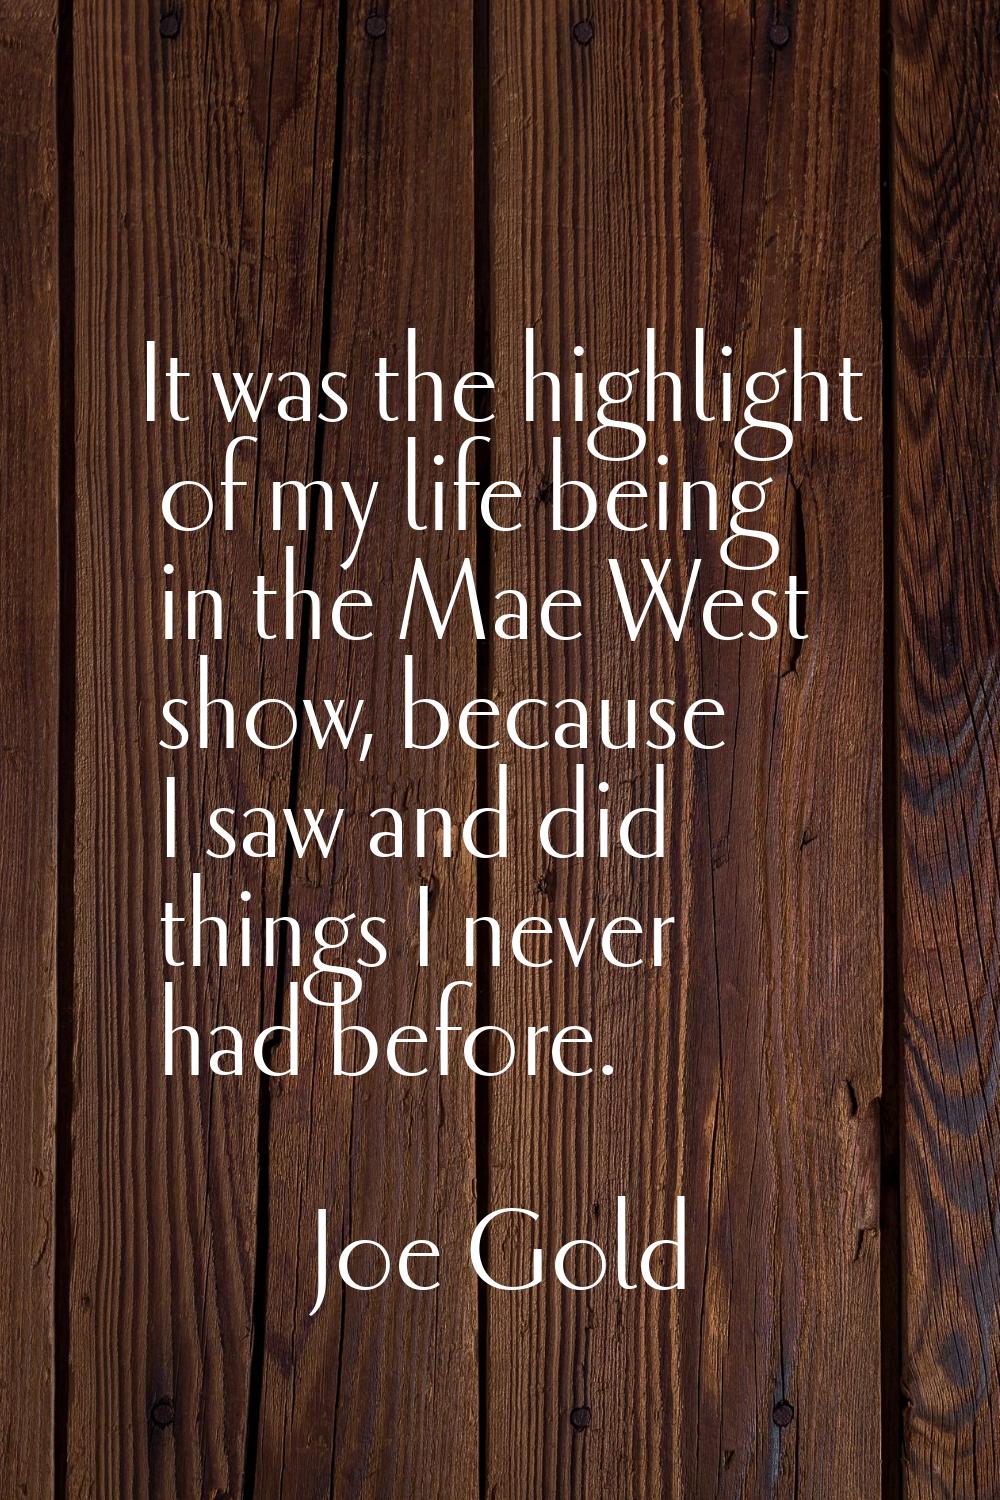 It was the highlight of my life being in the Mae West show, because I saw and did things I never ha